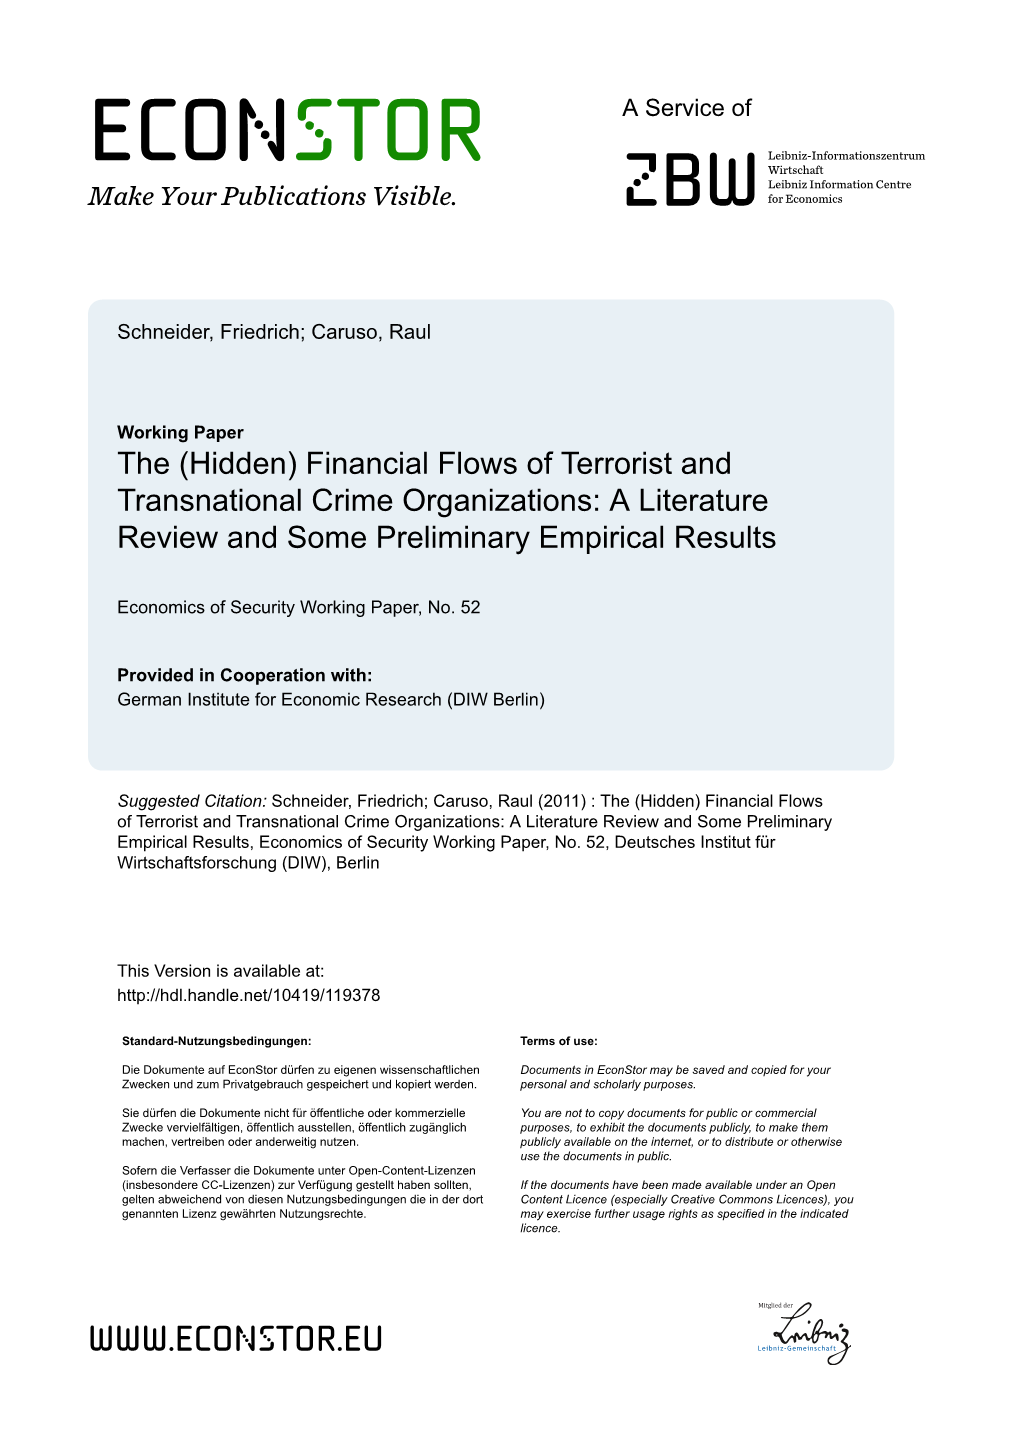 Financial Flows of Terrorist and Transnational Crime Organizations: a Literature Review and Some Preliminary Empirical Results